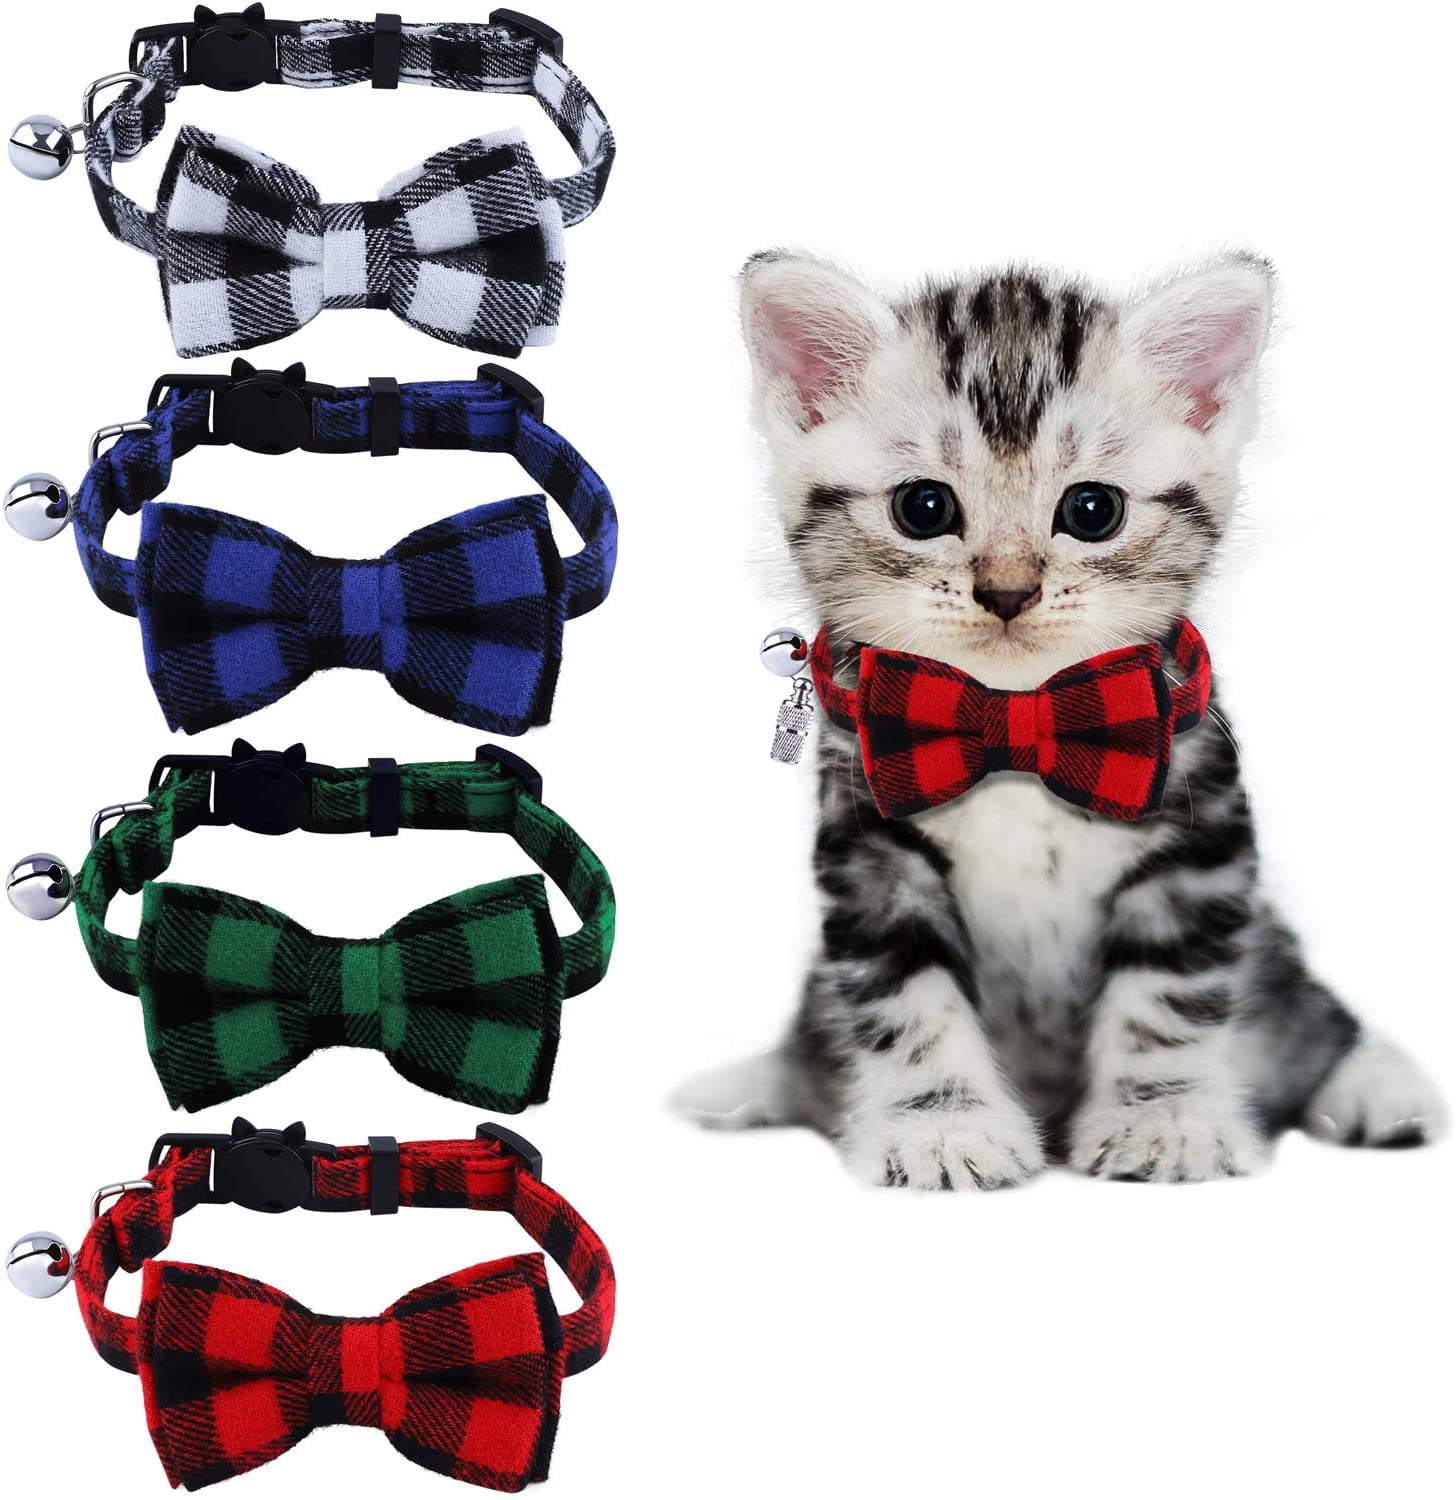 Grey Leaf Dog Bow tie Cat Accessories Cat Bow Tie Dog Accessories Slips on your pet's collar!